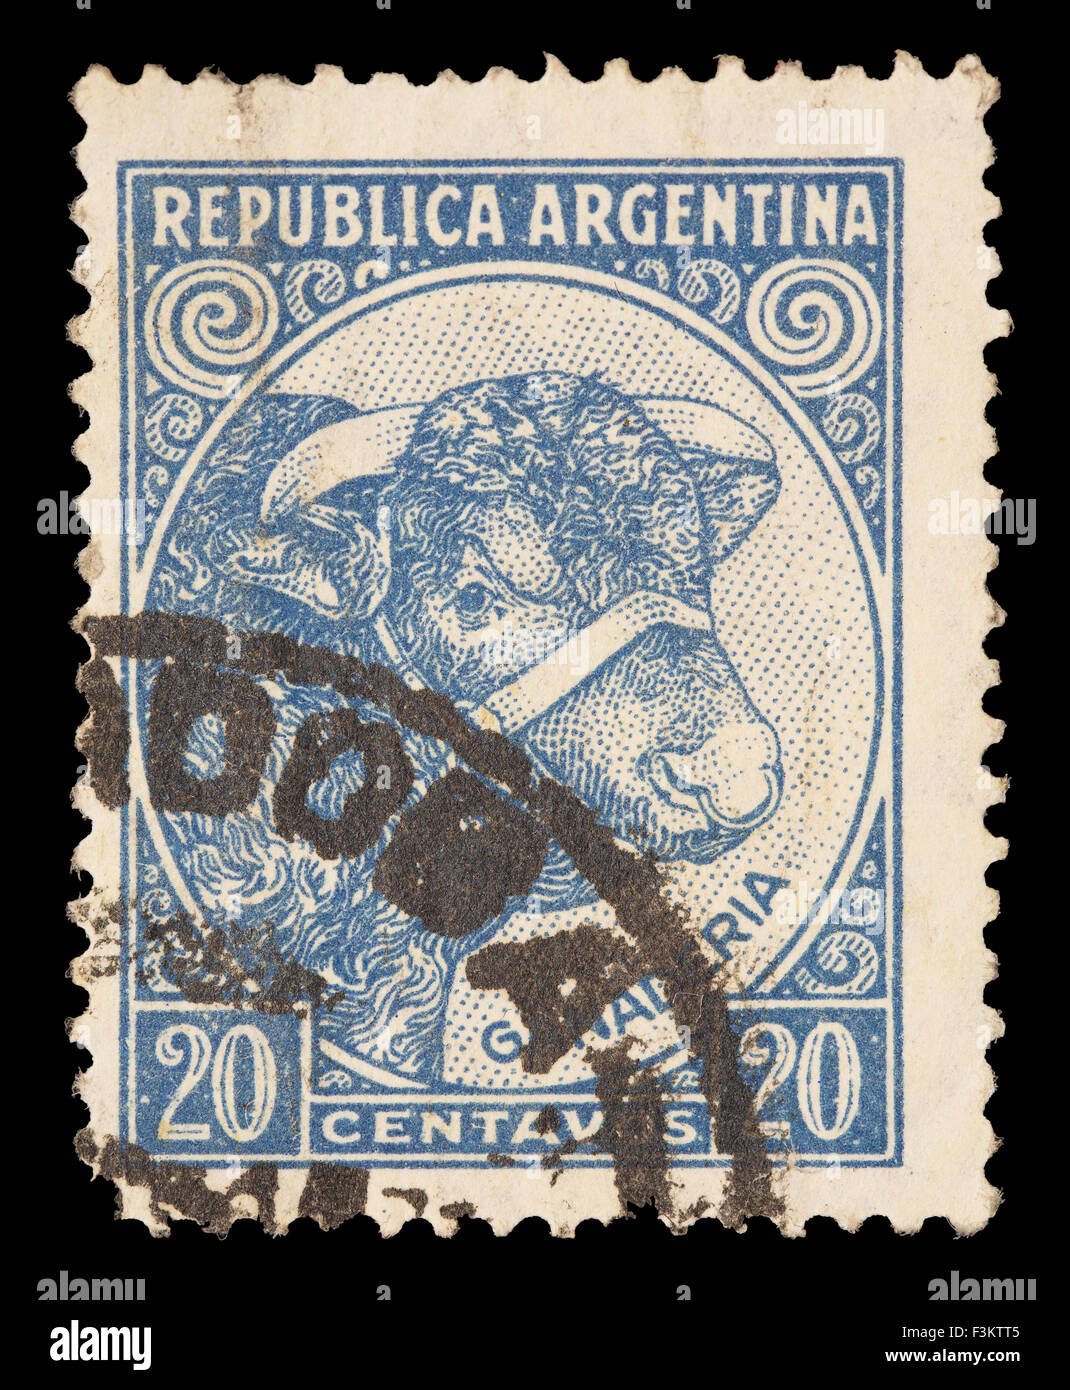 ARGENTINA - CIRCA 1951: A postage stamp printed in Argentina shows Bull and Cattle Breeding, circa 1951 Stock Photo